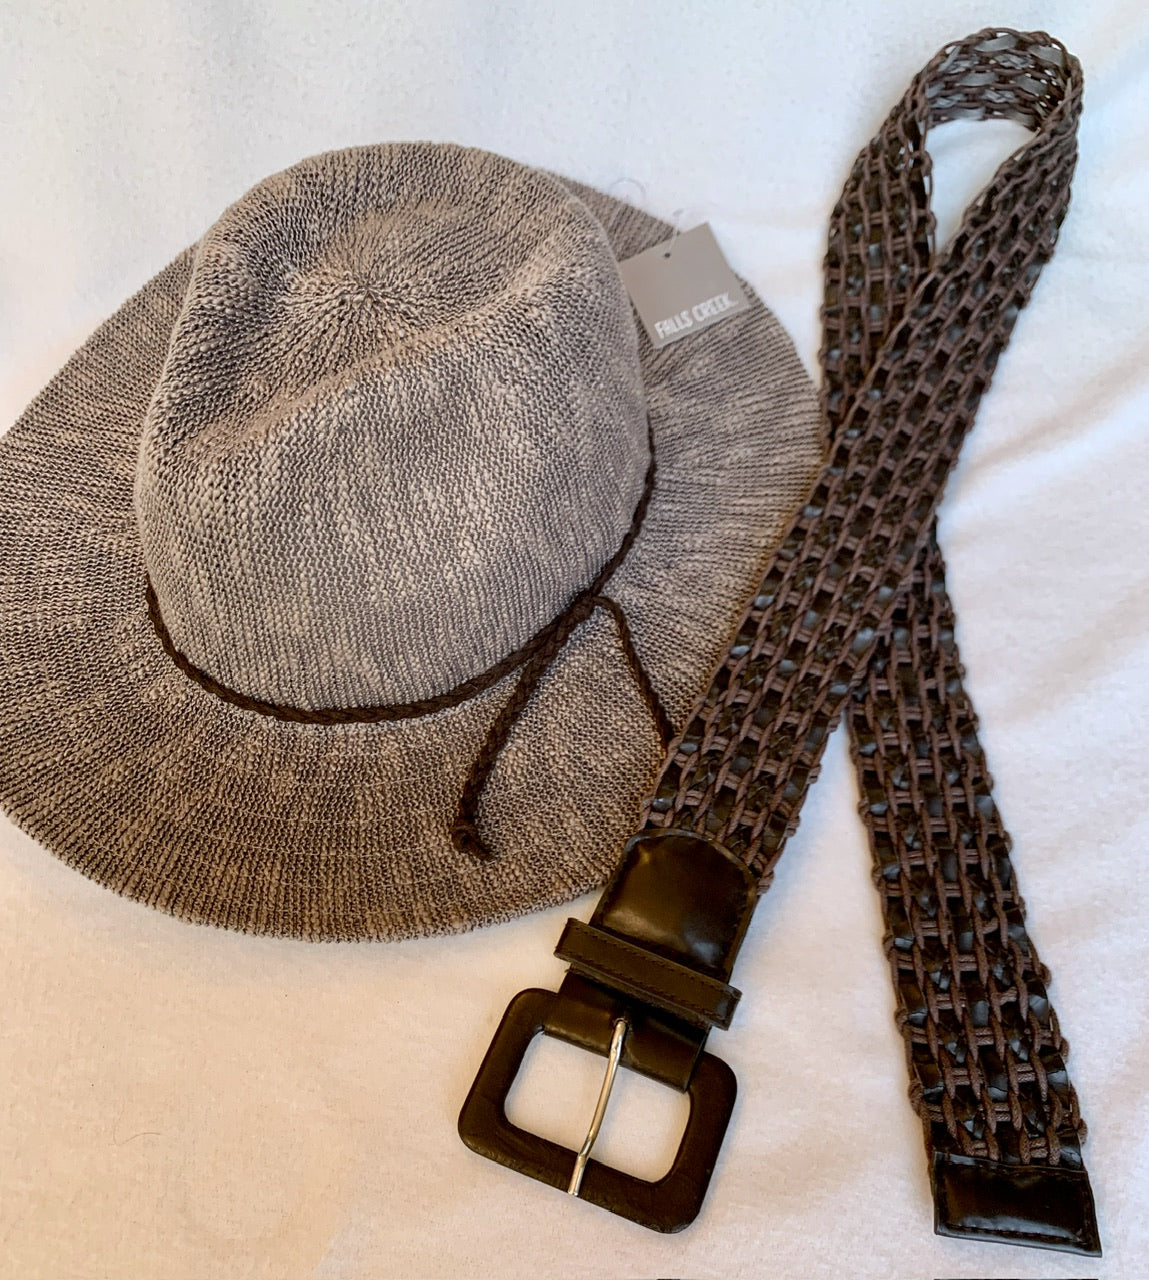 NWT Women’s Woven Hat, with fun coordinating belt